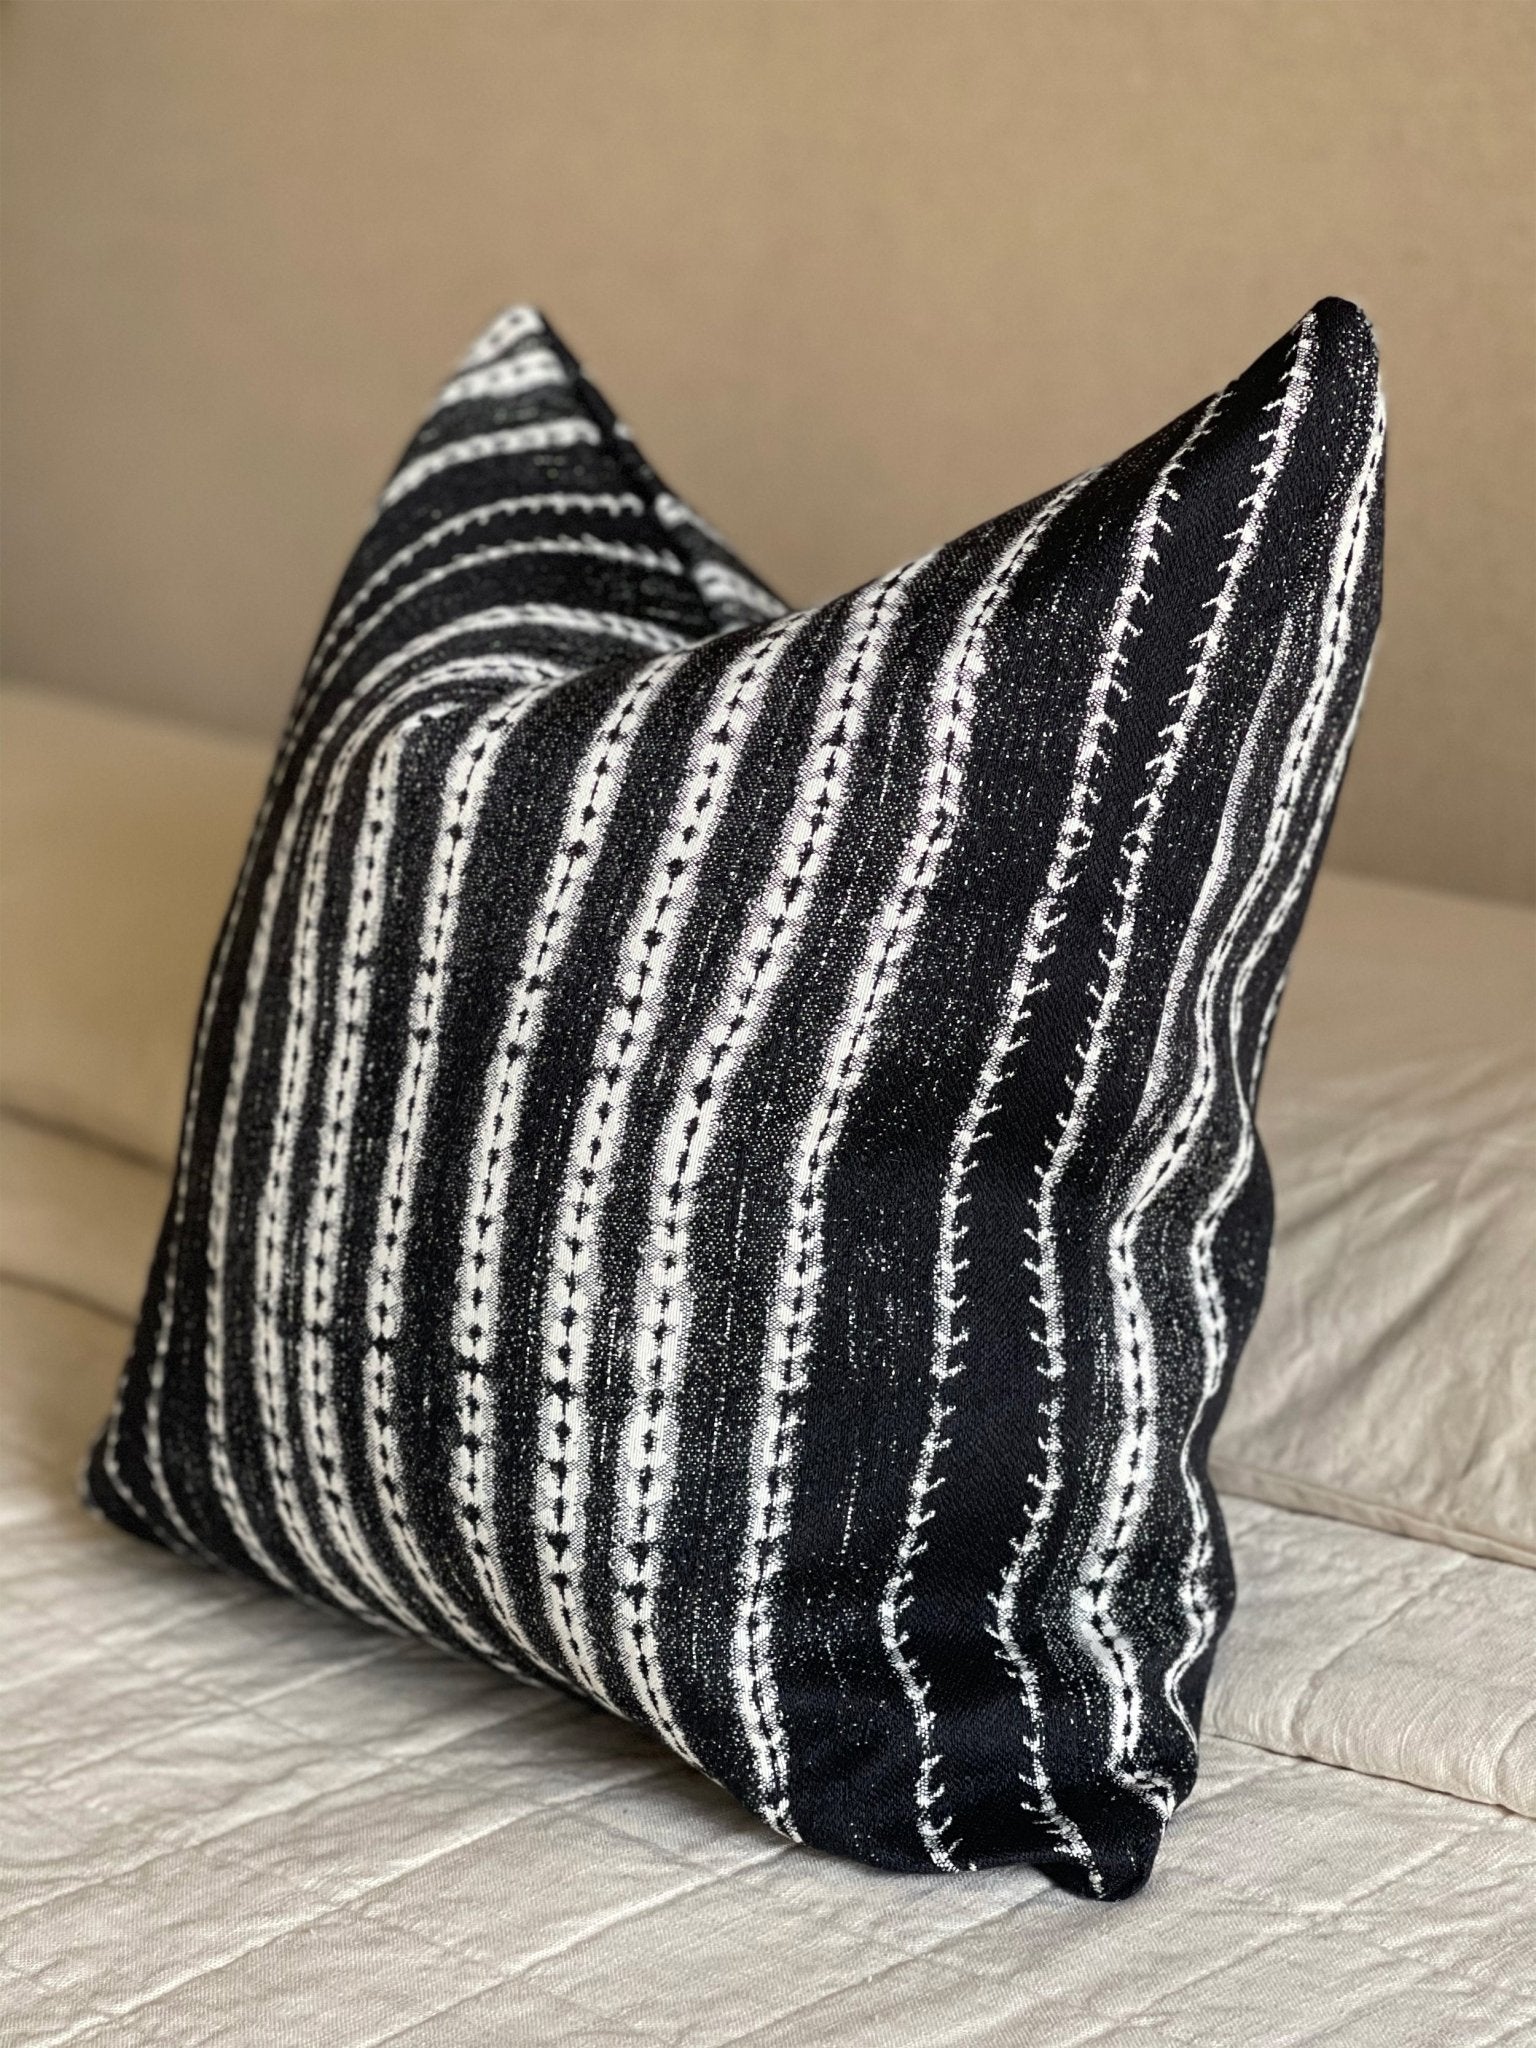 A throw pillow in black and white stipes adds bold contrast impact to your space